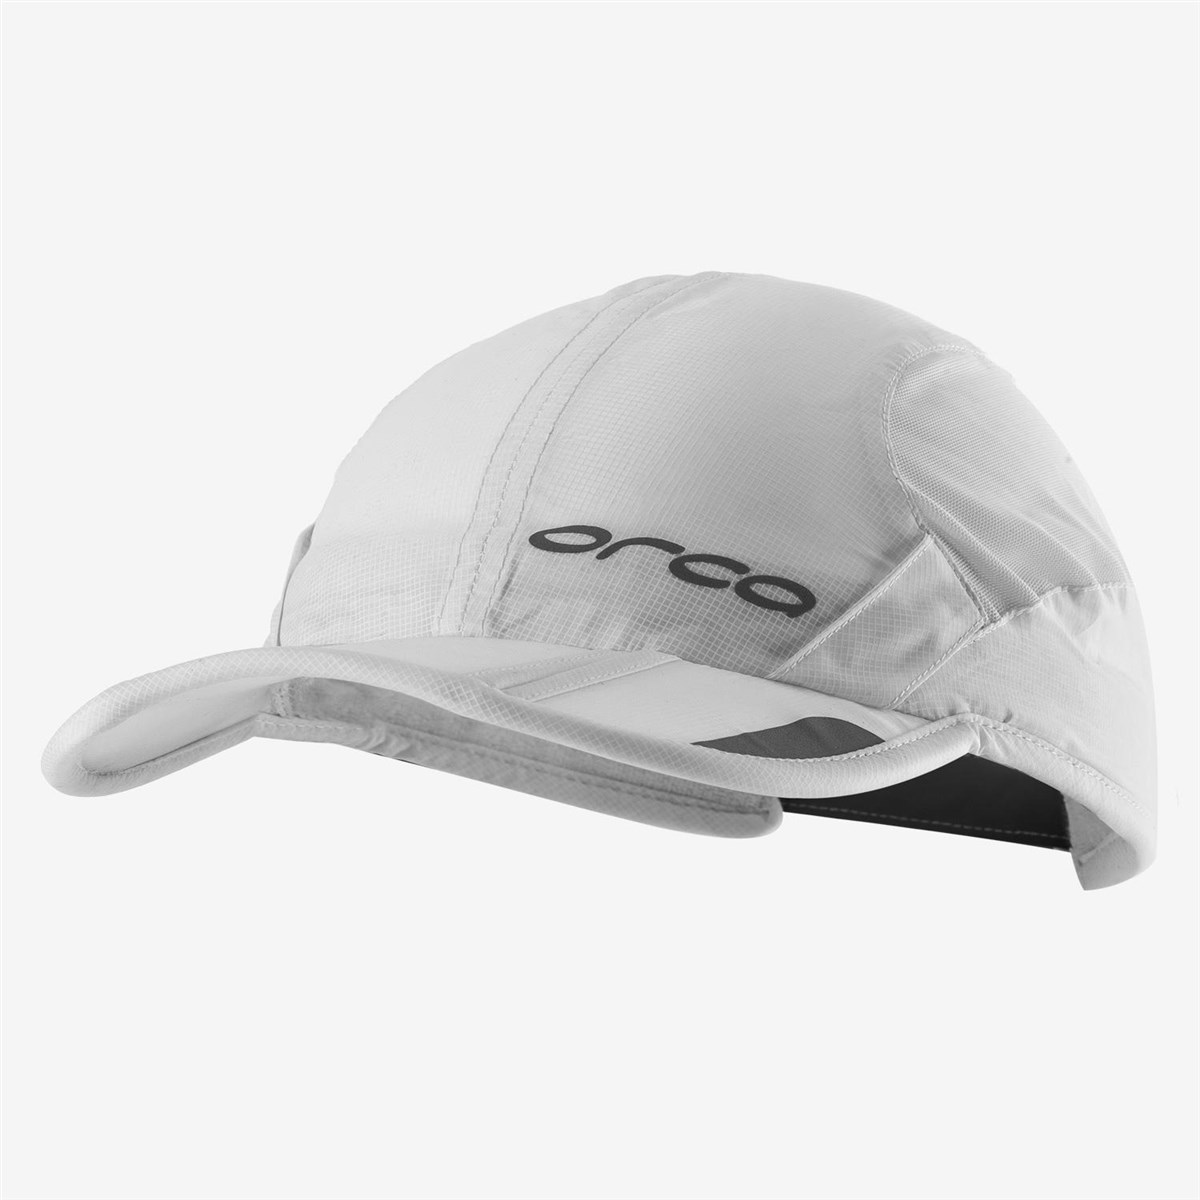 Orca Foldable Cap product image